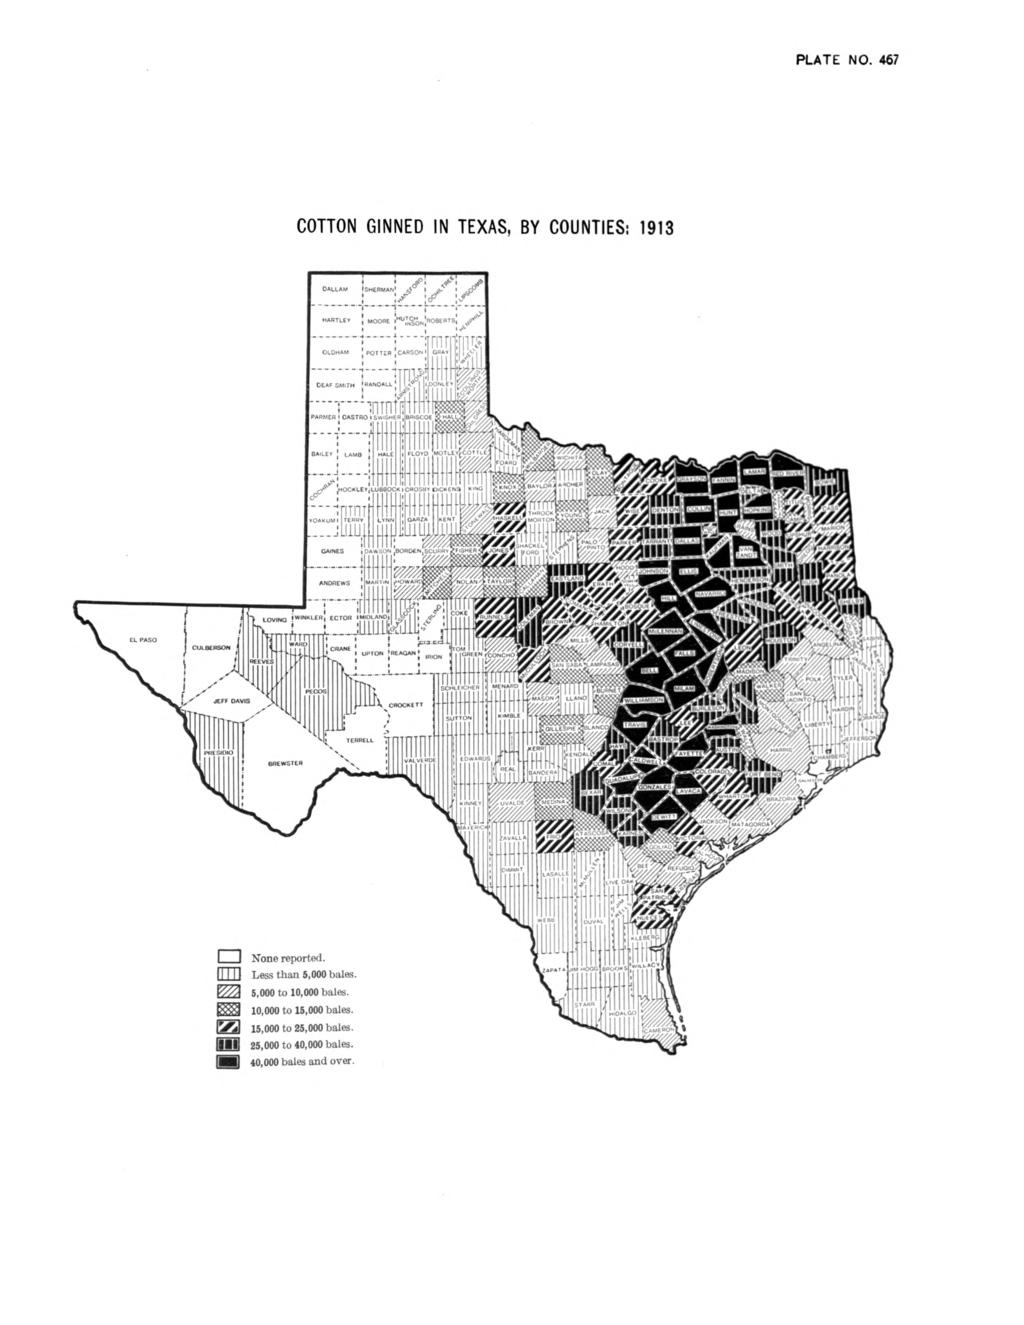 PLATE NO. 467 COTTON GINNED IN TEXAS, BY COUNTIES: 1913 n None reported. Hill Less than 5,000 bales. 5.000 to 10,000 bales.